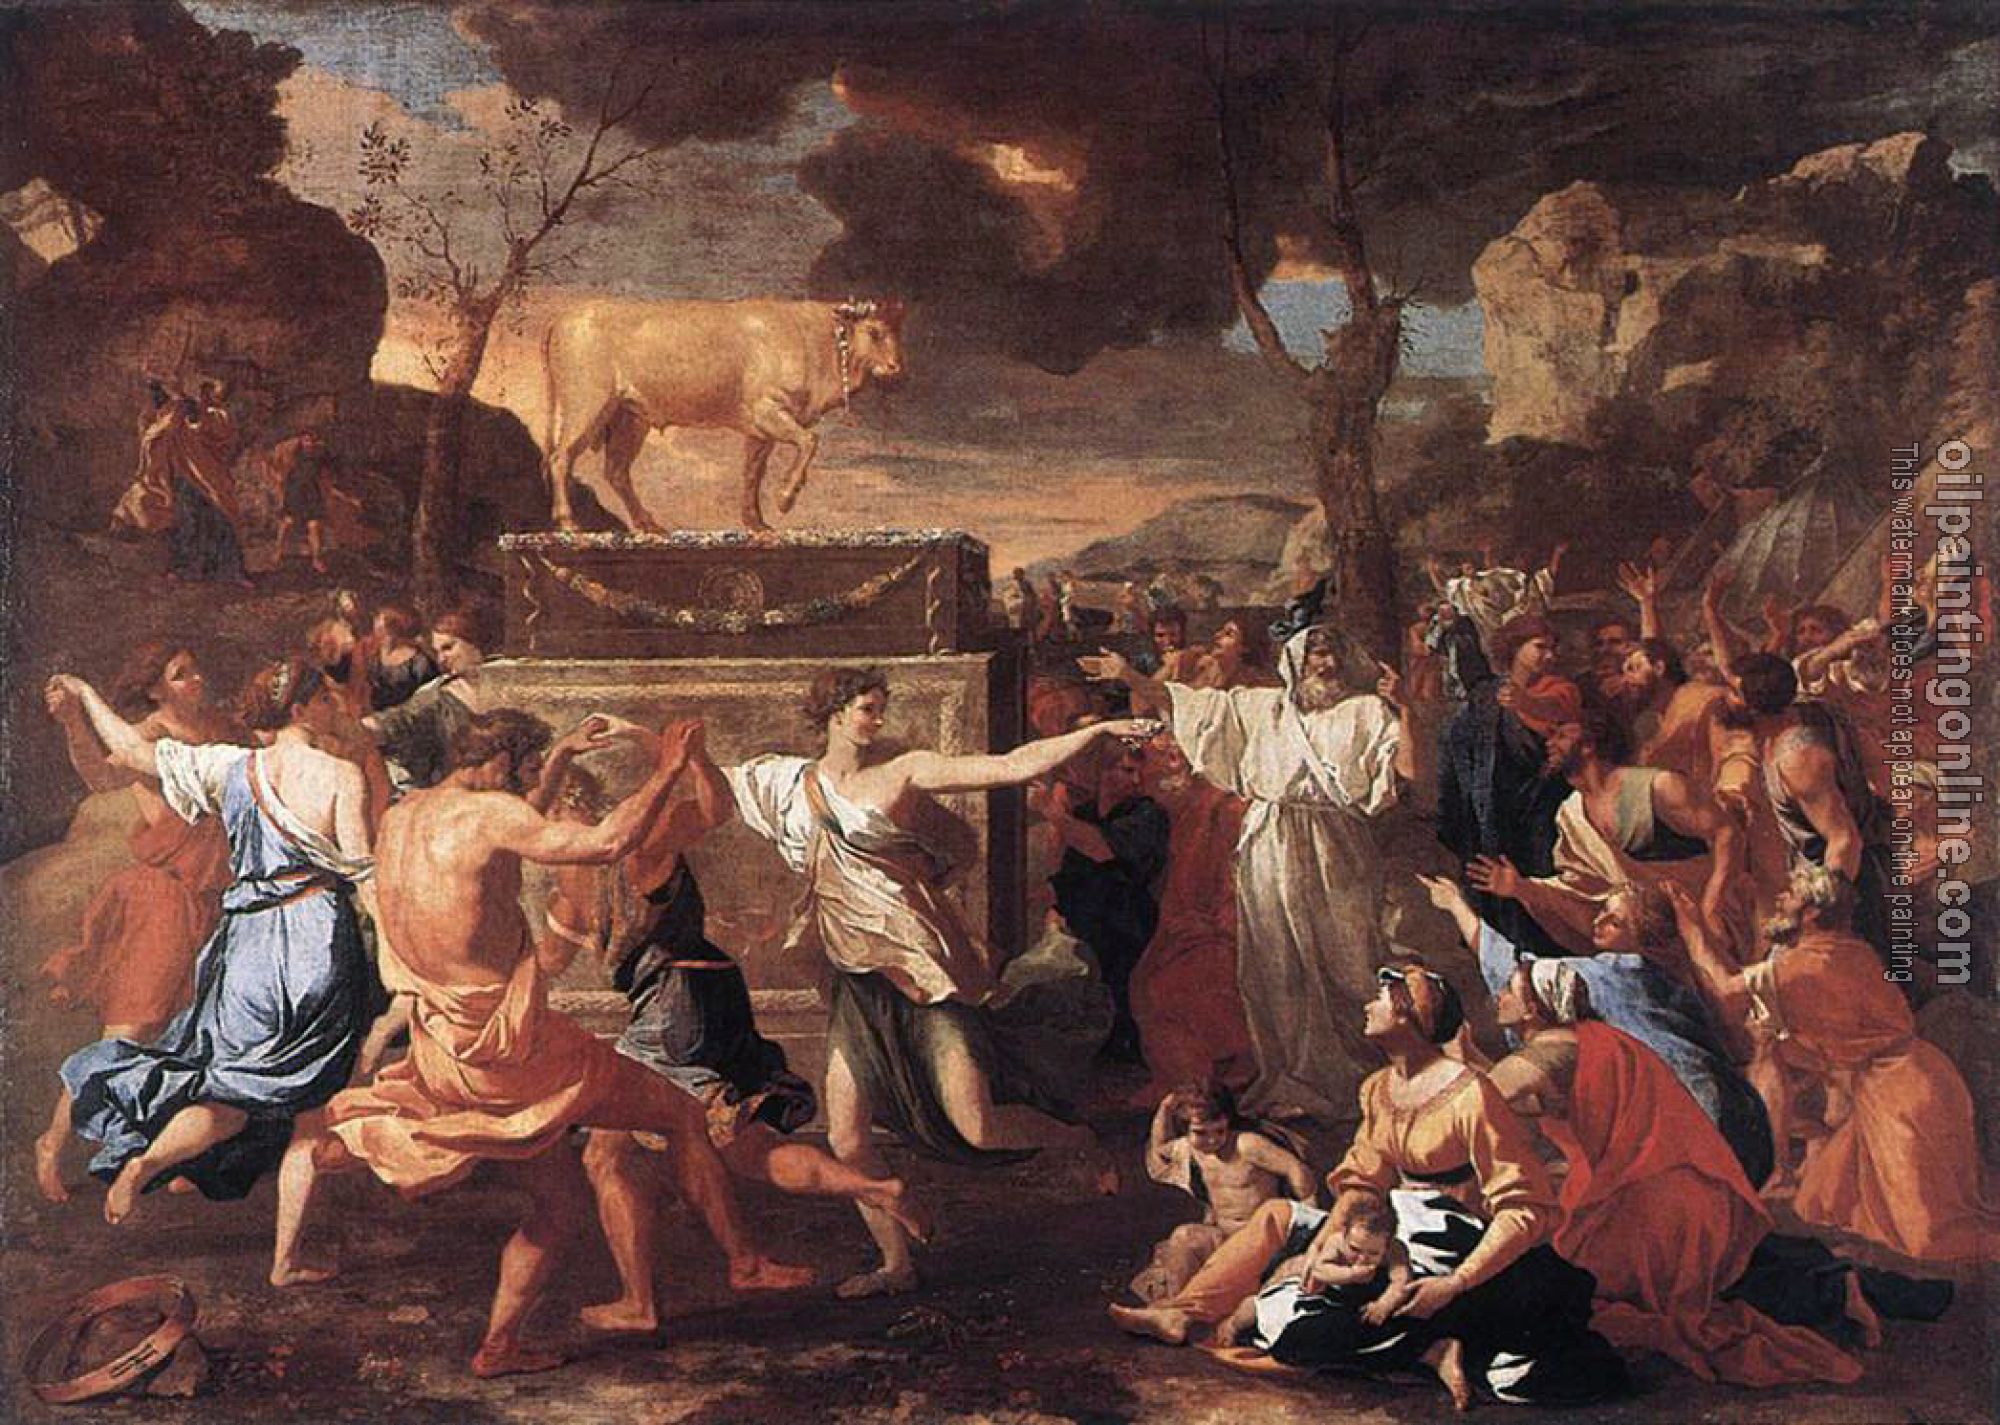 Poussin, Nicolas - The Adoration of the Golden Calf, approx